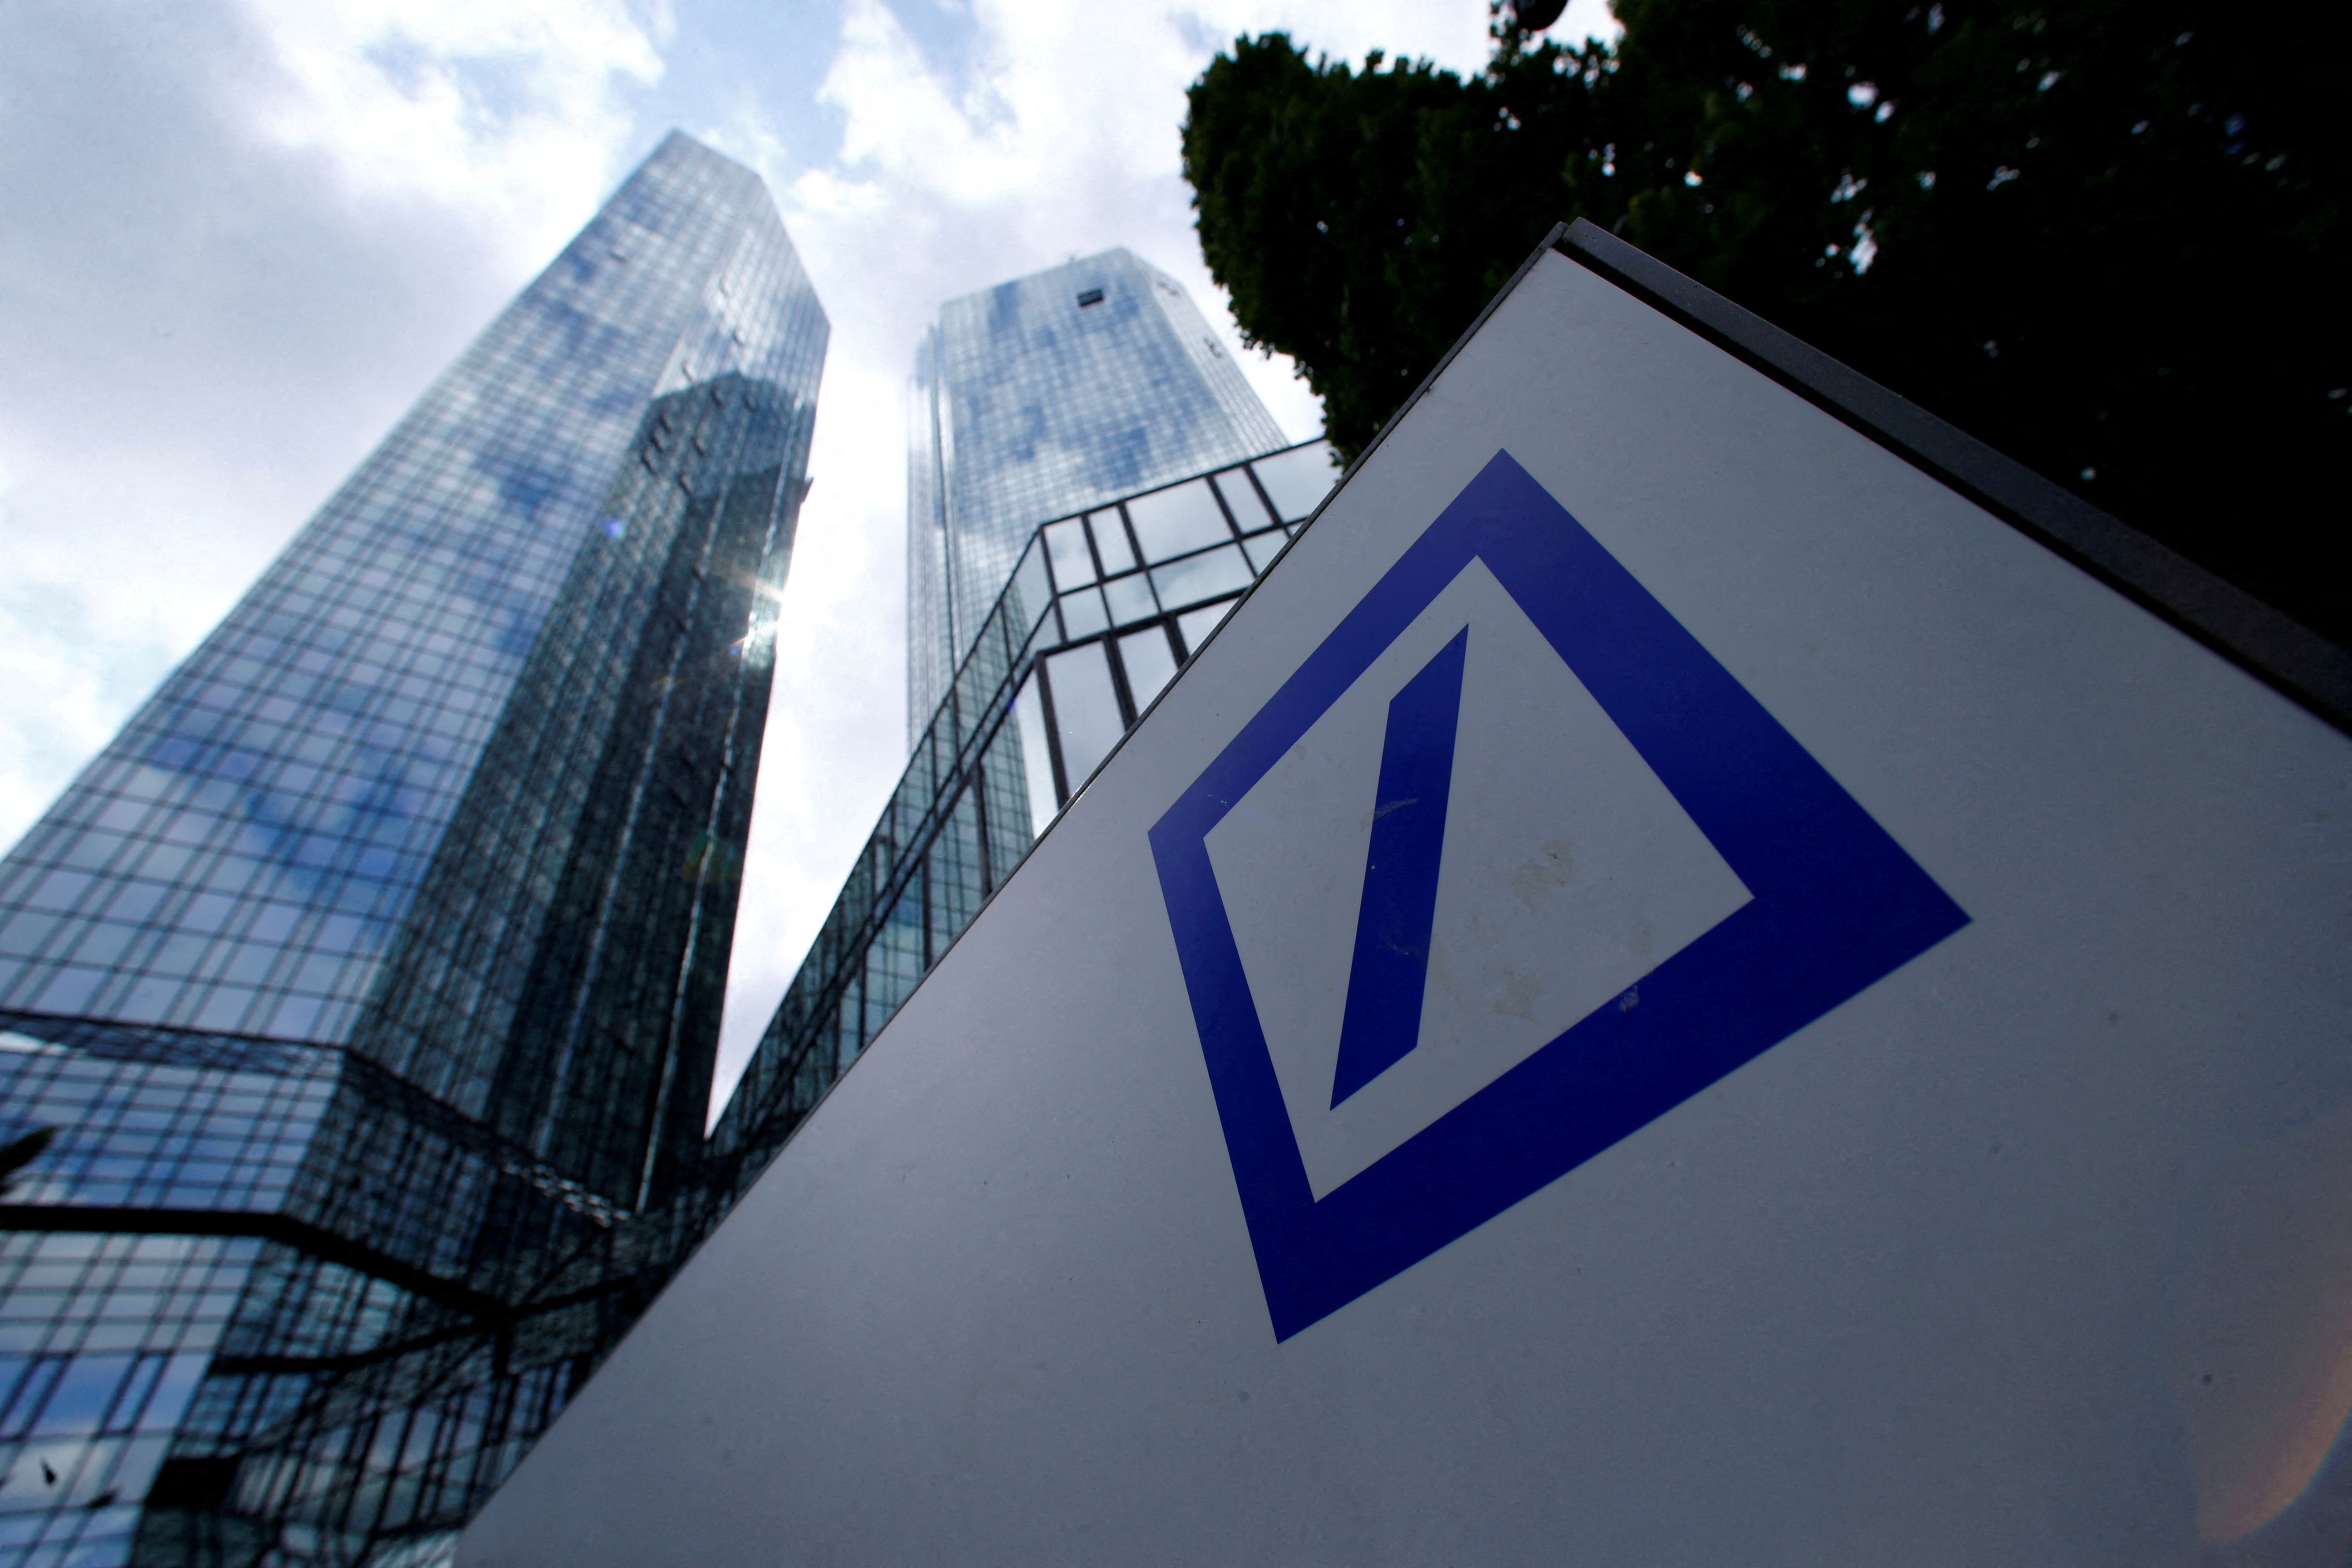 A Deutsche Bank logo adorns a wall at the company's headquarters in Frankfurt, Germany June 9, 2015. REUTERS/Ralph Orlowski//File Photo